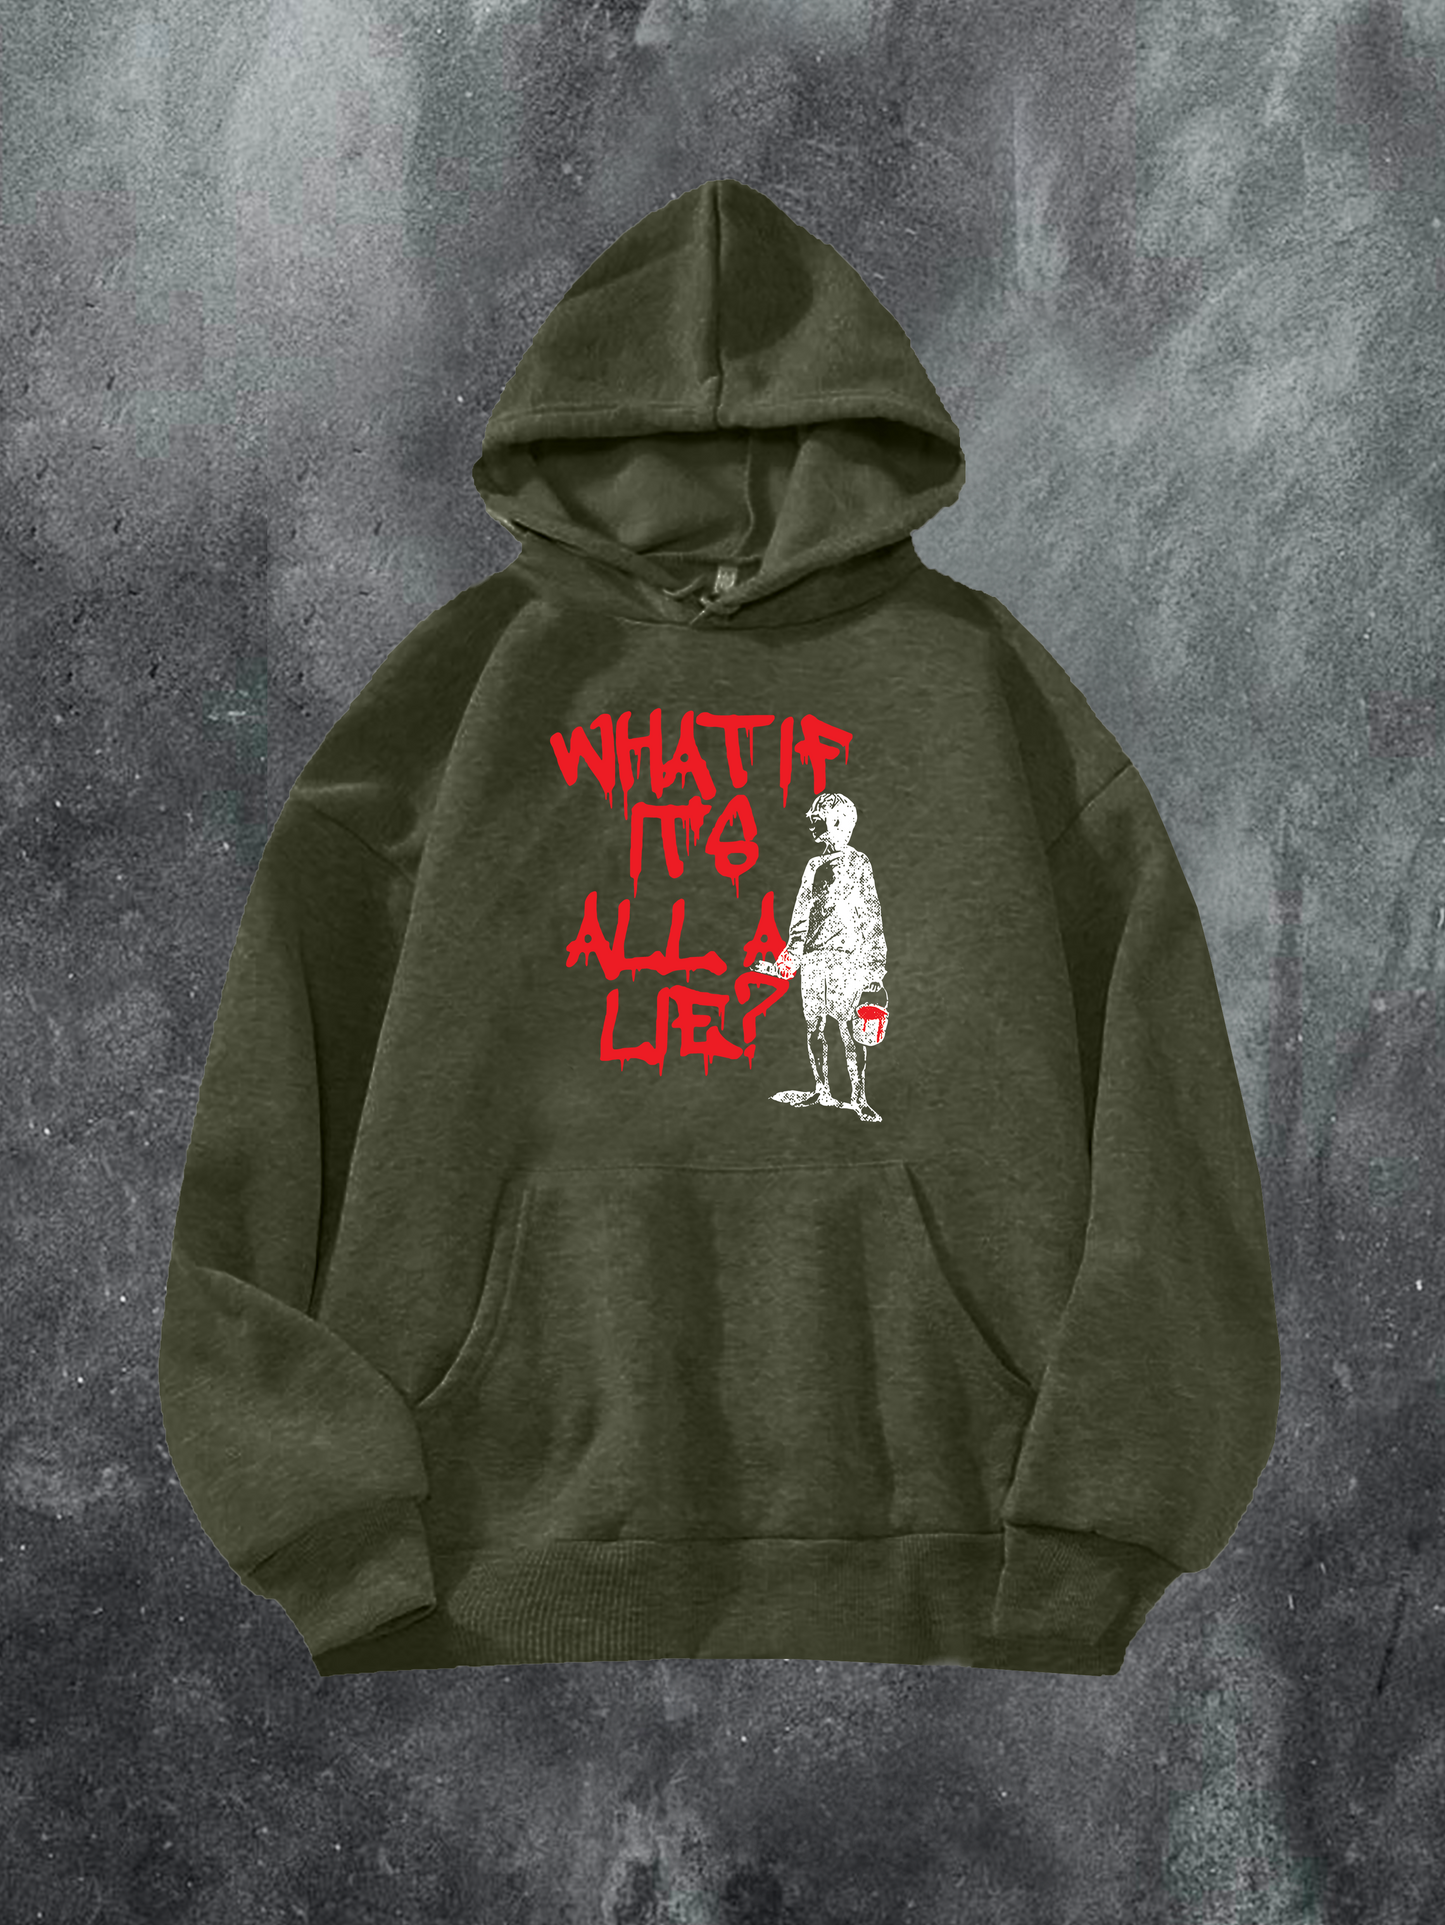 WHAT IF IT'S All A LIE Hoodie